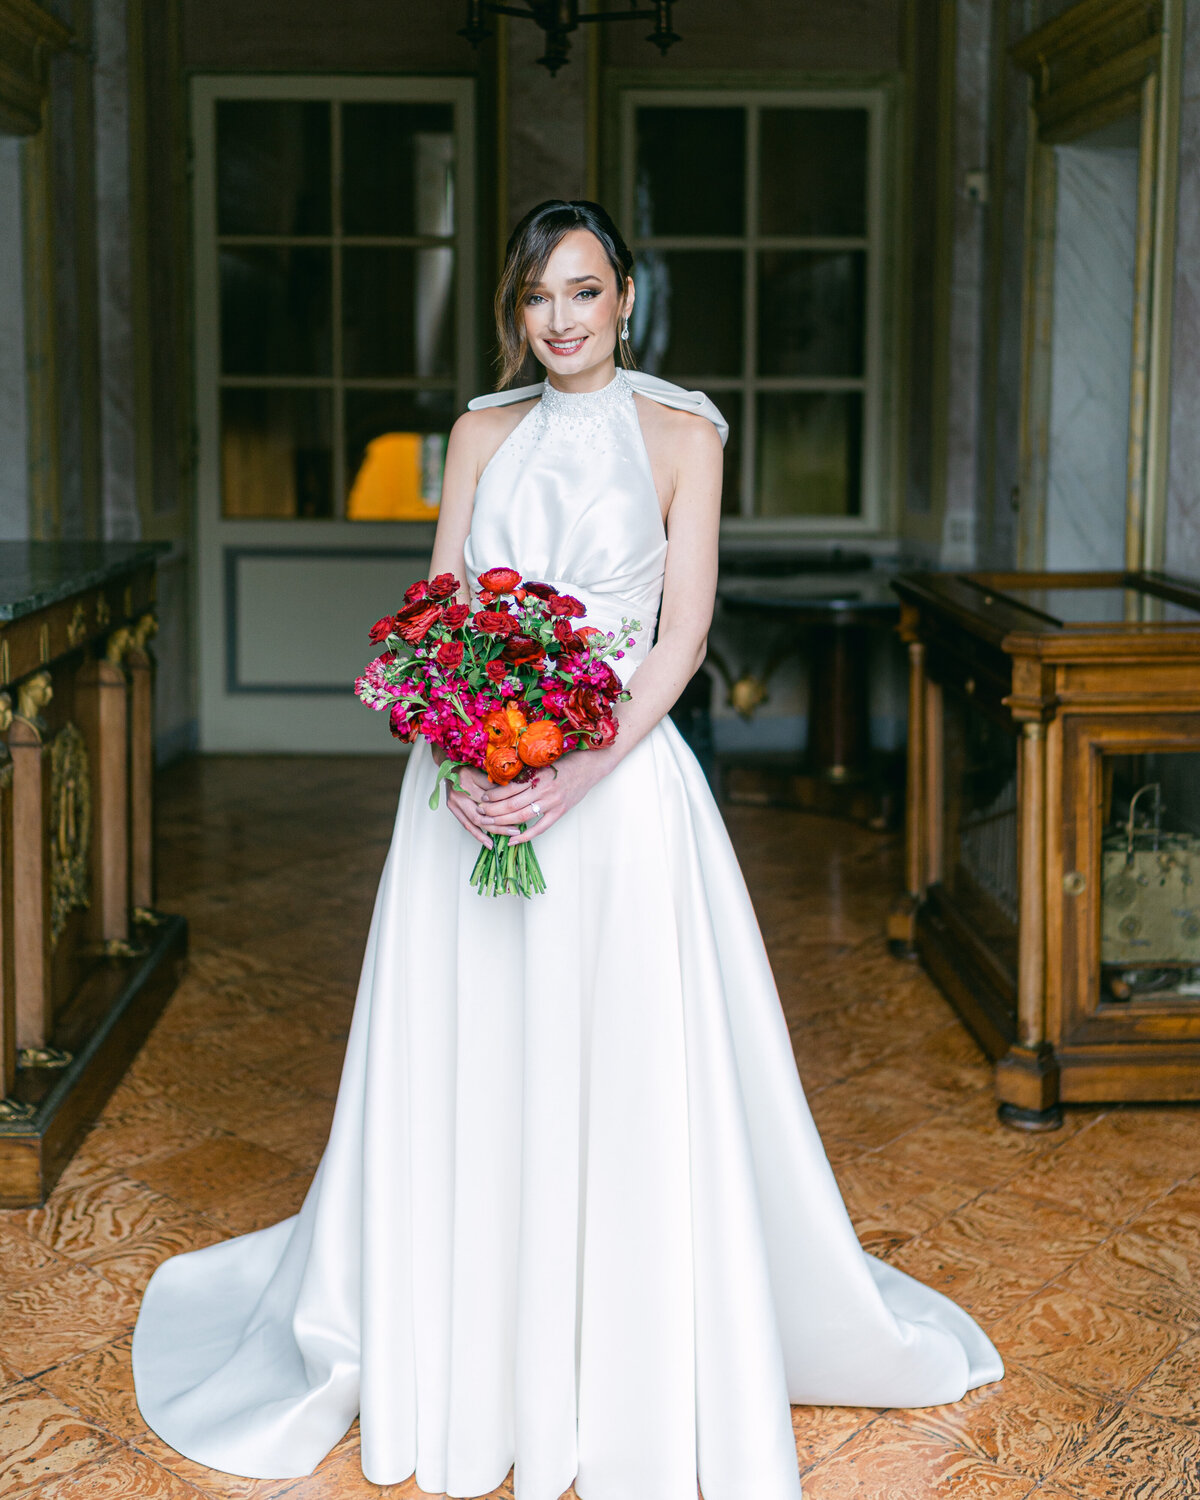 Bridal portrait in bespoke wedding dress with red bouquet at Villa Pizzo on Lake Como